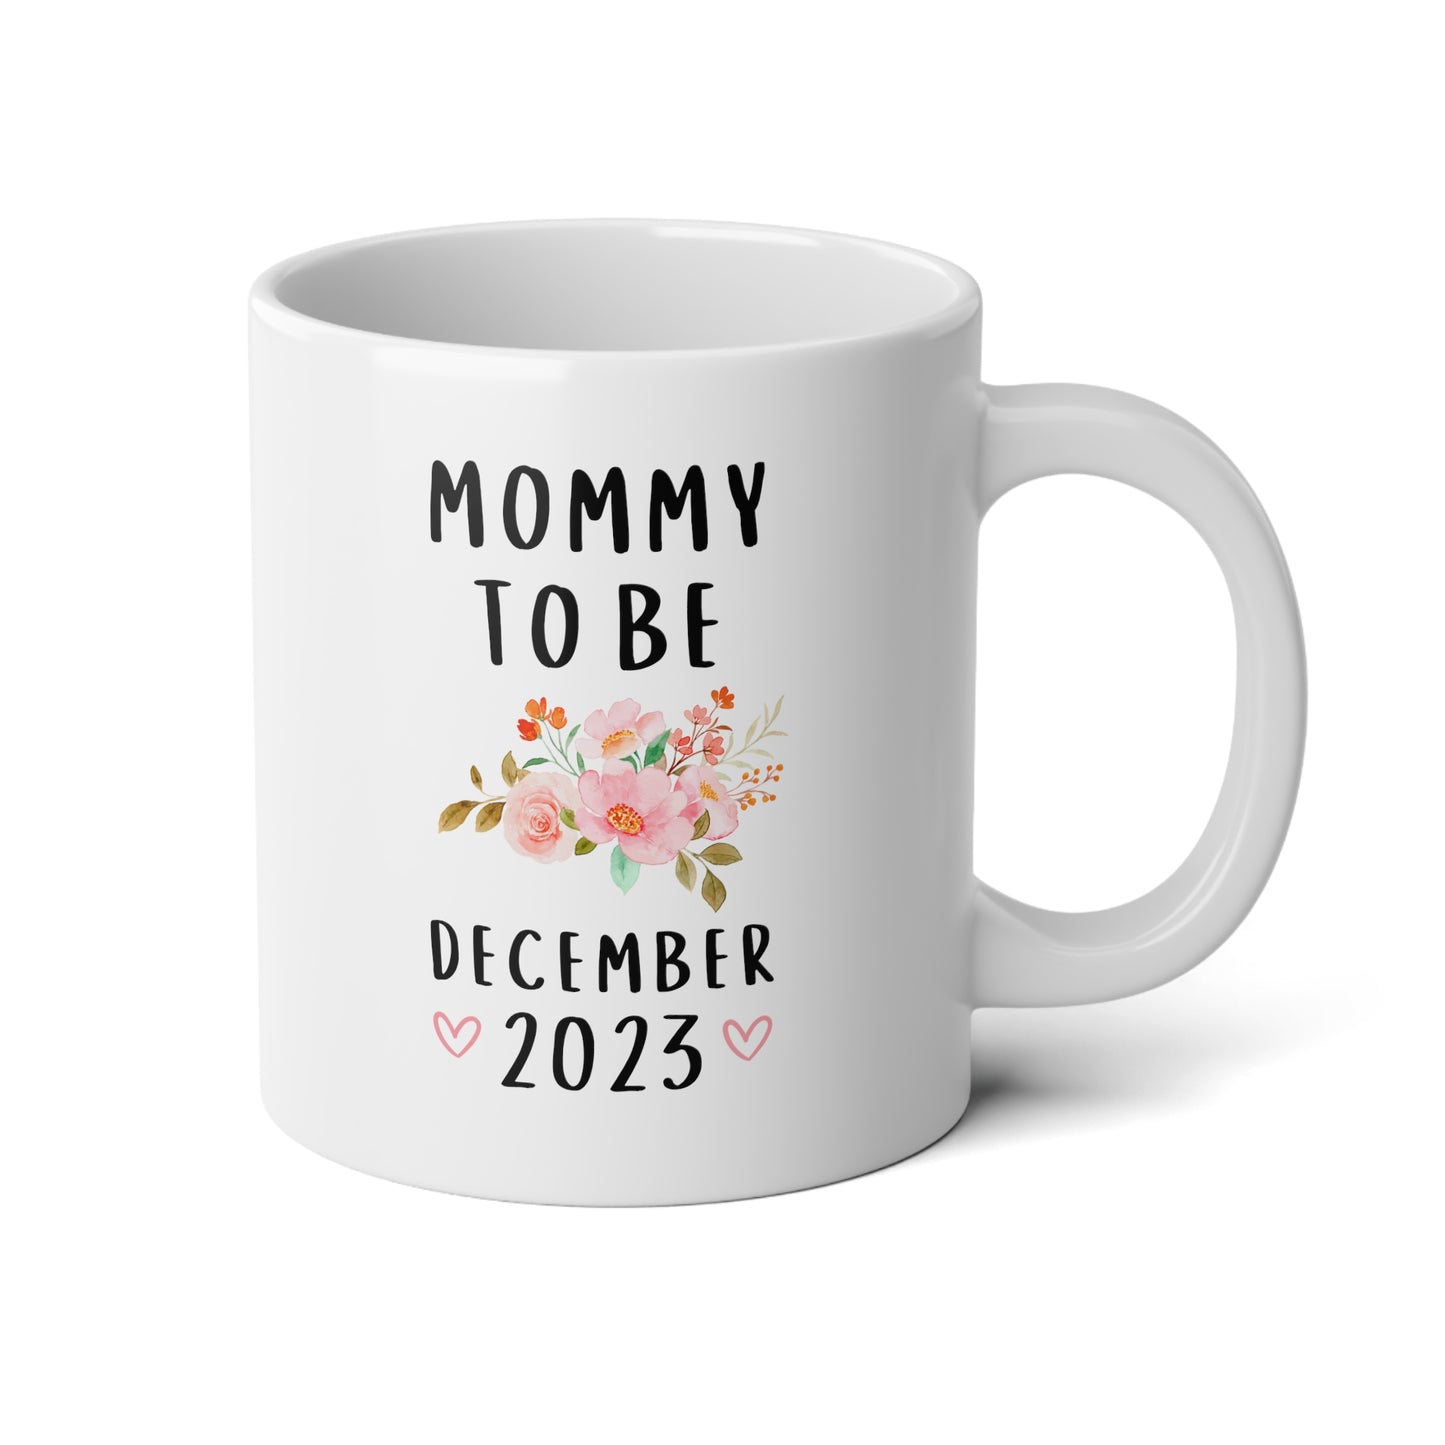 Mommy to Be 20oz white funny large coffee mug gift for future mother new mom pregnancy announcement due date floral mum personalized custom waveywares wavey wares wavywares wavy wares